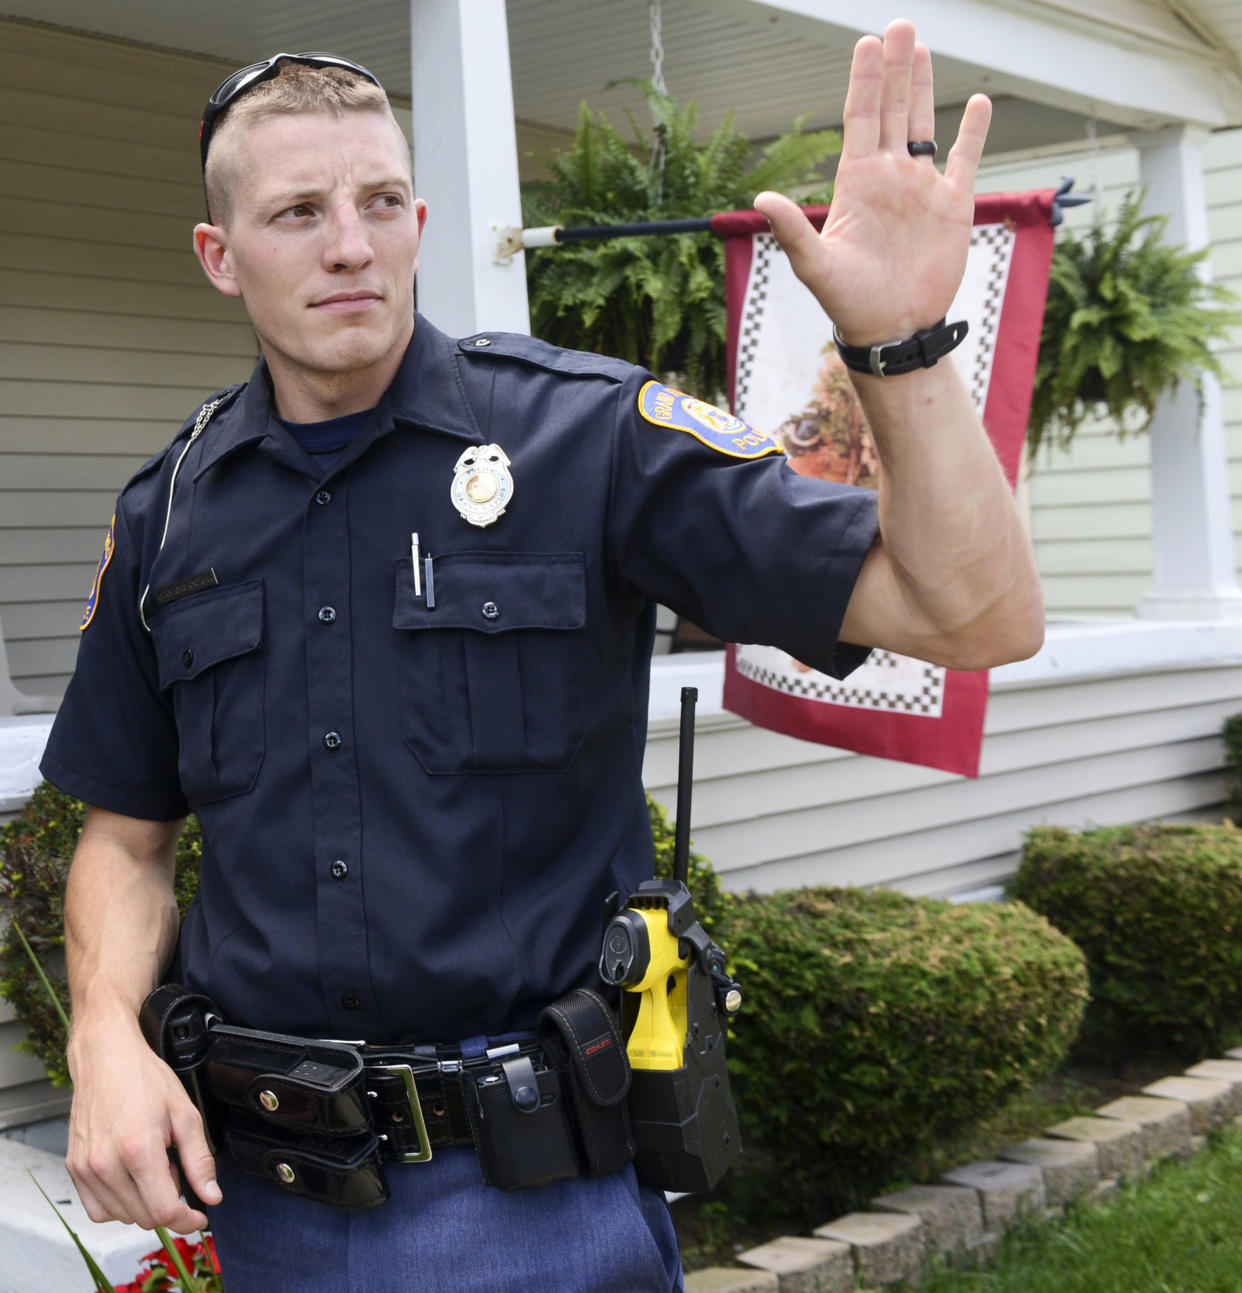 FILE -Grand Rapids Police Officer Christopher Schurr stops to talk with a resident, Wednesday, August 12, 2015, in Grand Rapids, Mich. Prosecutor Chris Becker said he will announce Thursday, June, 9, 2022 whether charges will be filed in the death of Patrick Lyoya, a Black man who was on the ground when he was shot in the back of the head by Grand Rapids Police Officer Christopher Schurr. (Emily Rose Bennett/The Grand Rapids Press via AP, File)